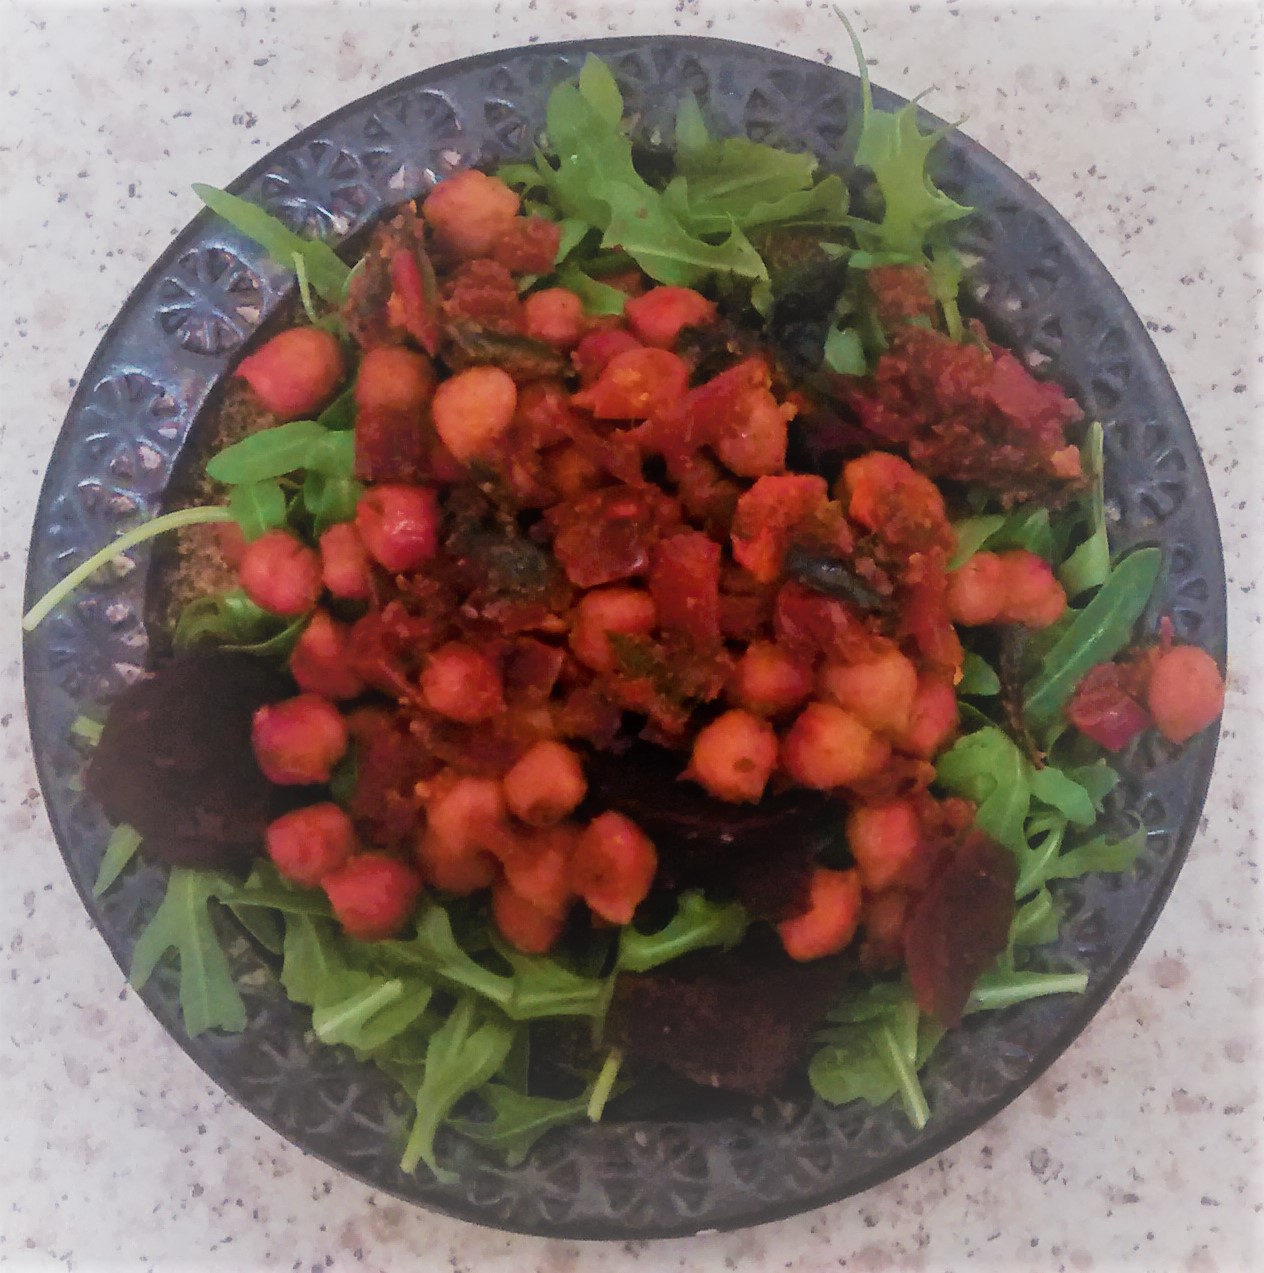 Spicy chickpeas and beetroot salad